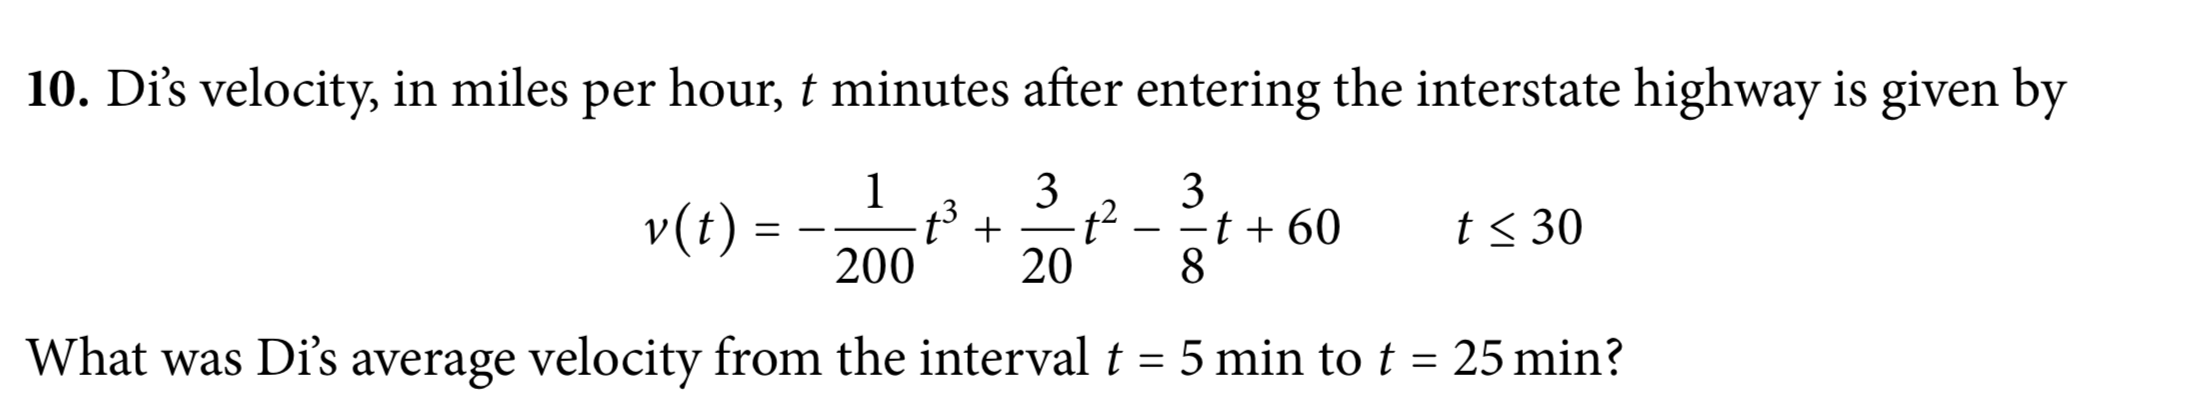 10. Di's velocity, in miles per hour, t minutes after entering the interstate highway is given by
3
3
t²
-t + 60
20
v(t) =
200
t< 30
What was Di's average velocity from the interval t = 5 min to t = 25 min?
